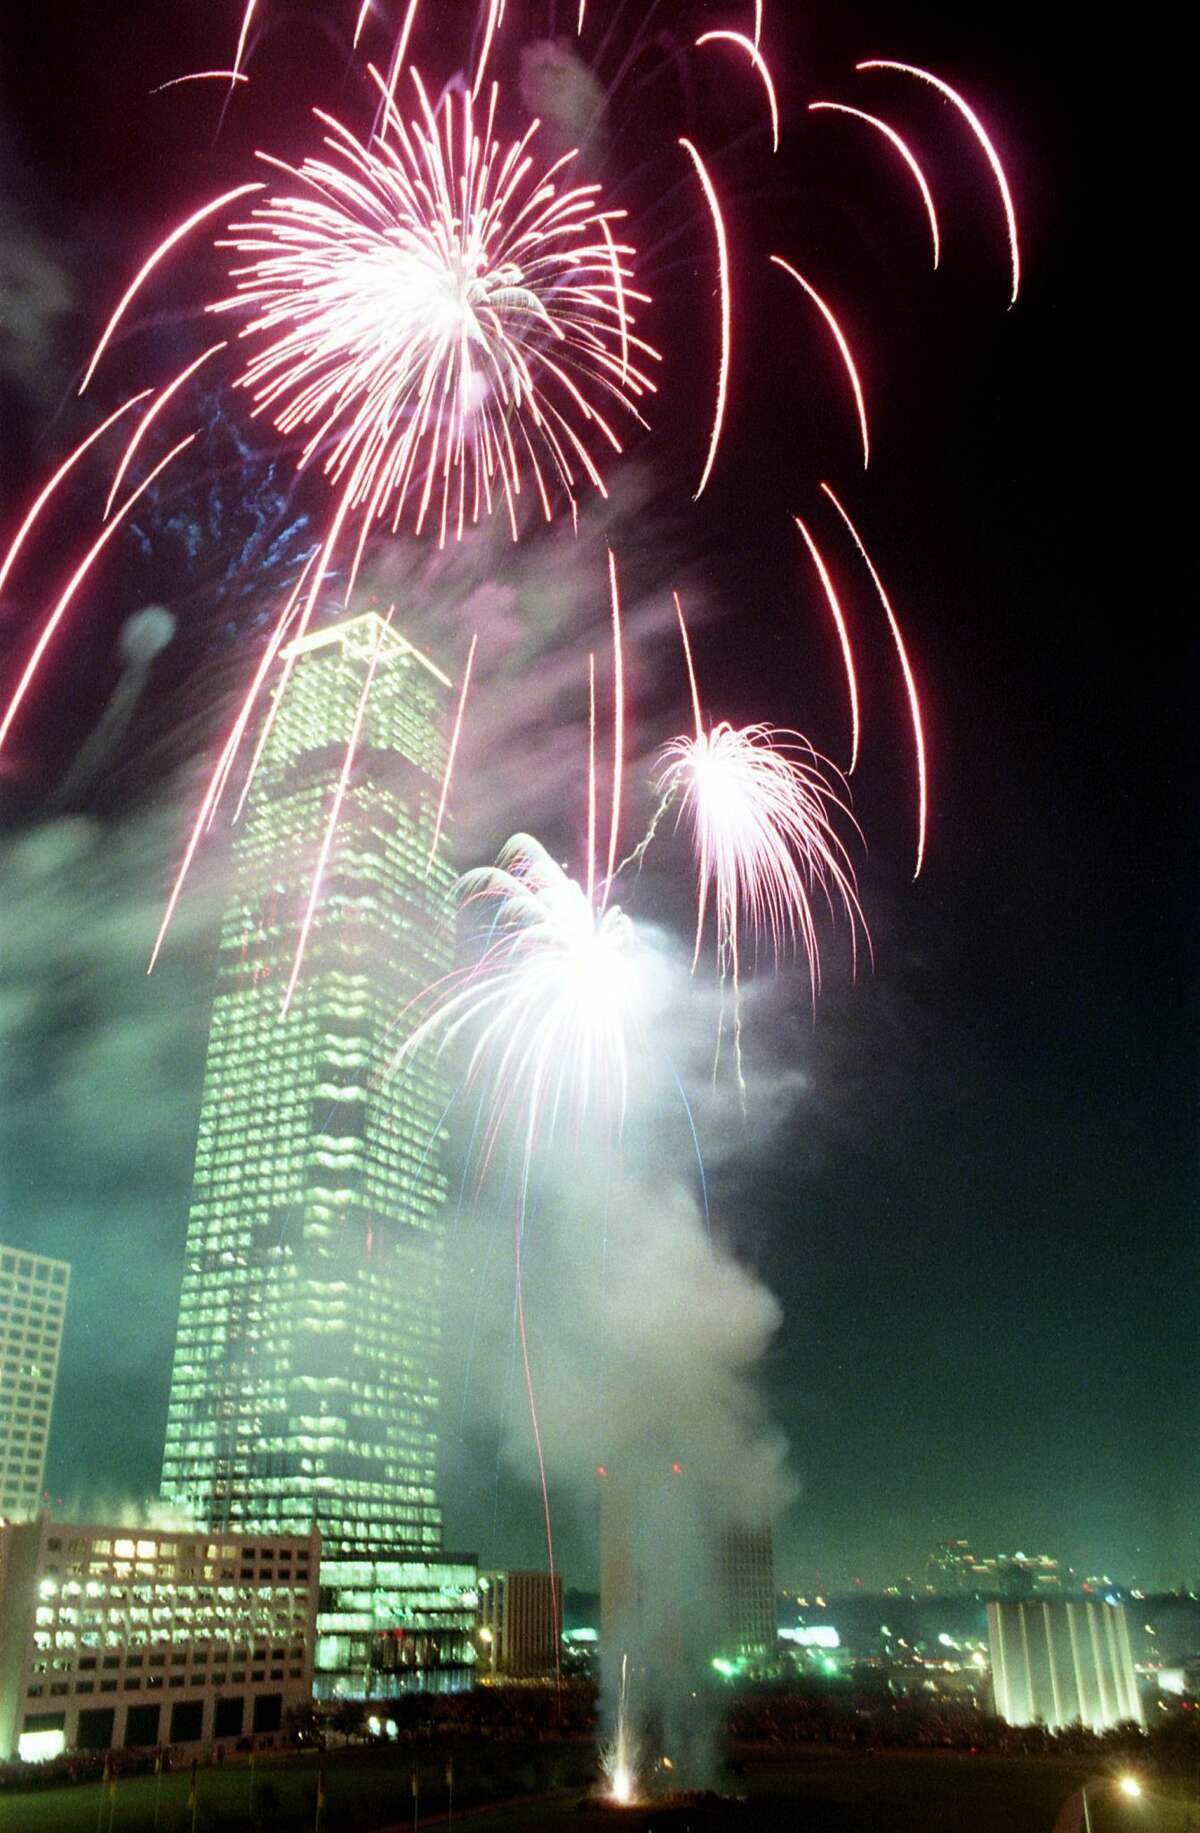 Old photos capture New Year's Eve in Houston through the years